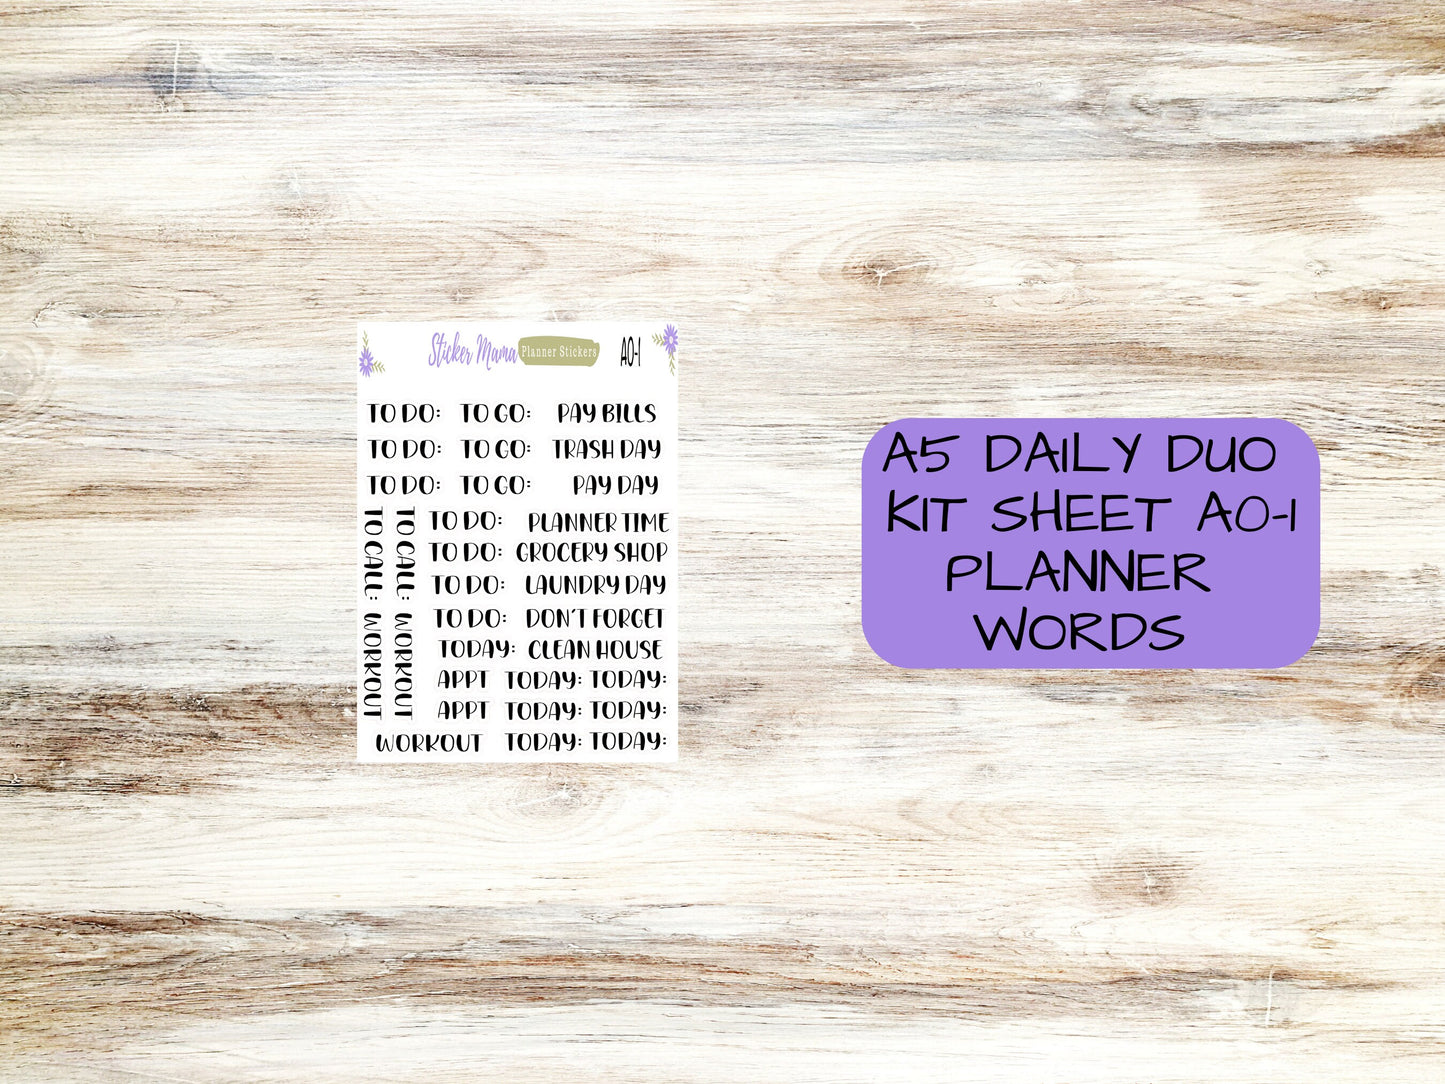 A5-DAILY DUO-Kit #3103 || Harvest Thanksgiving || Planner Stickers - Daily Duo A5 Planner - Daily Duo Stickers - Daily Planner